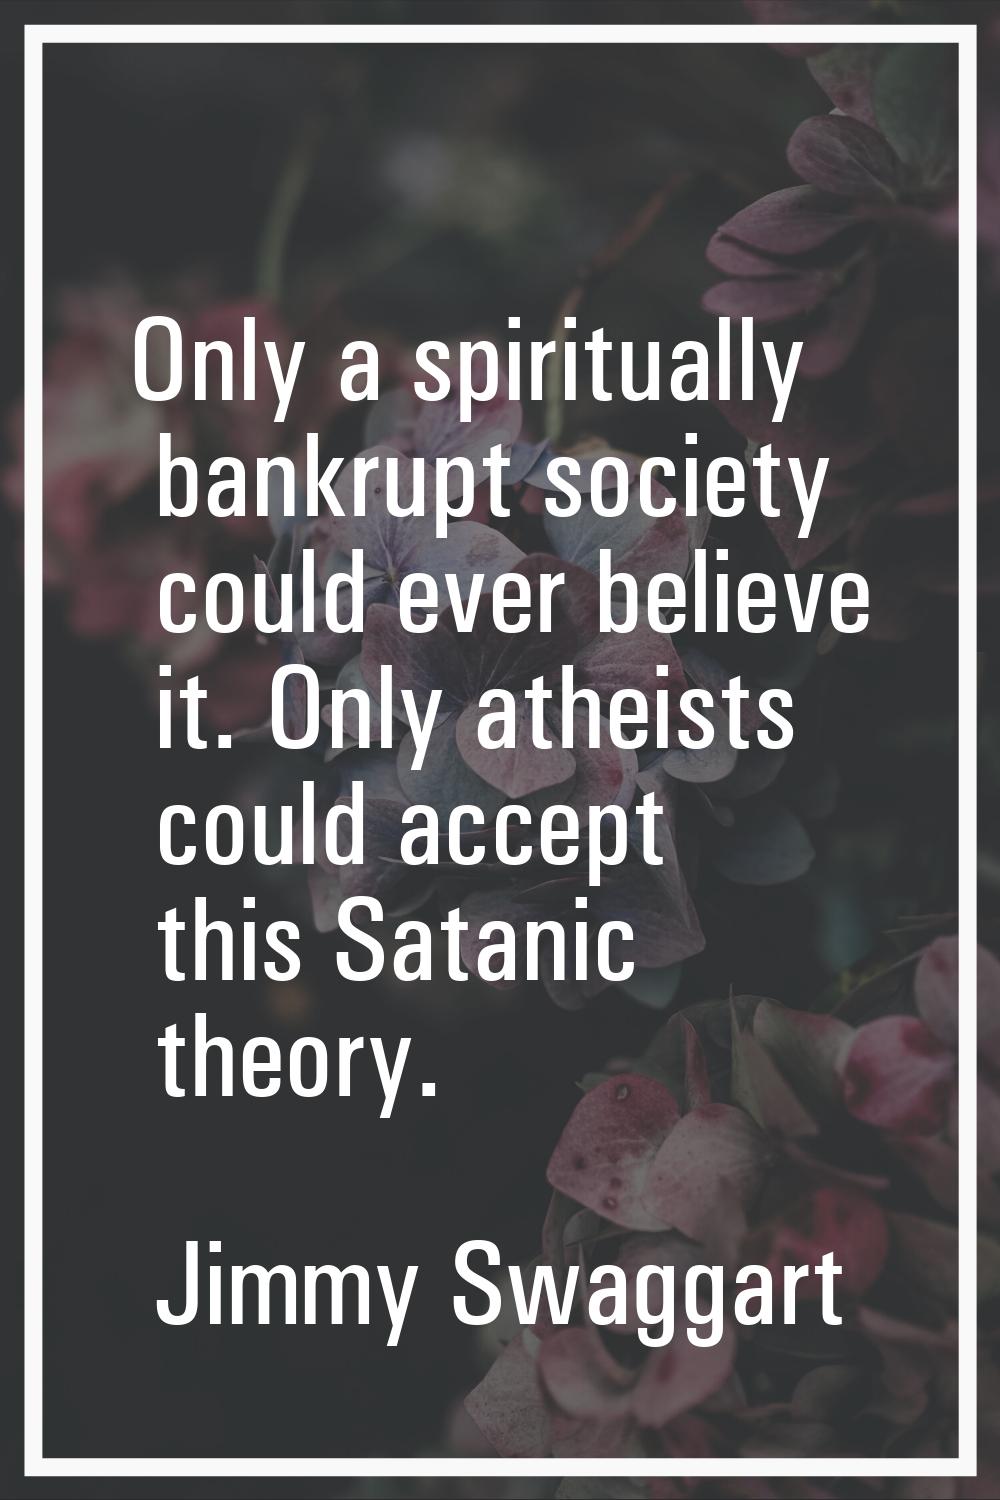 Only a spiritually bankrupt society could ever believe it. Only atheists could accept this Satanic 